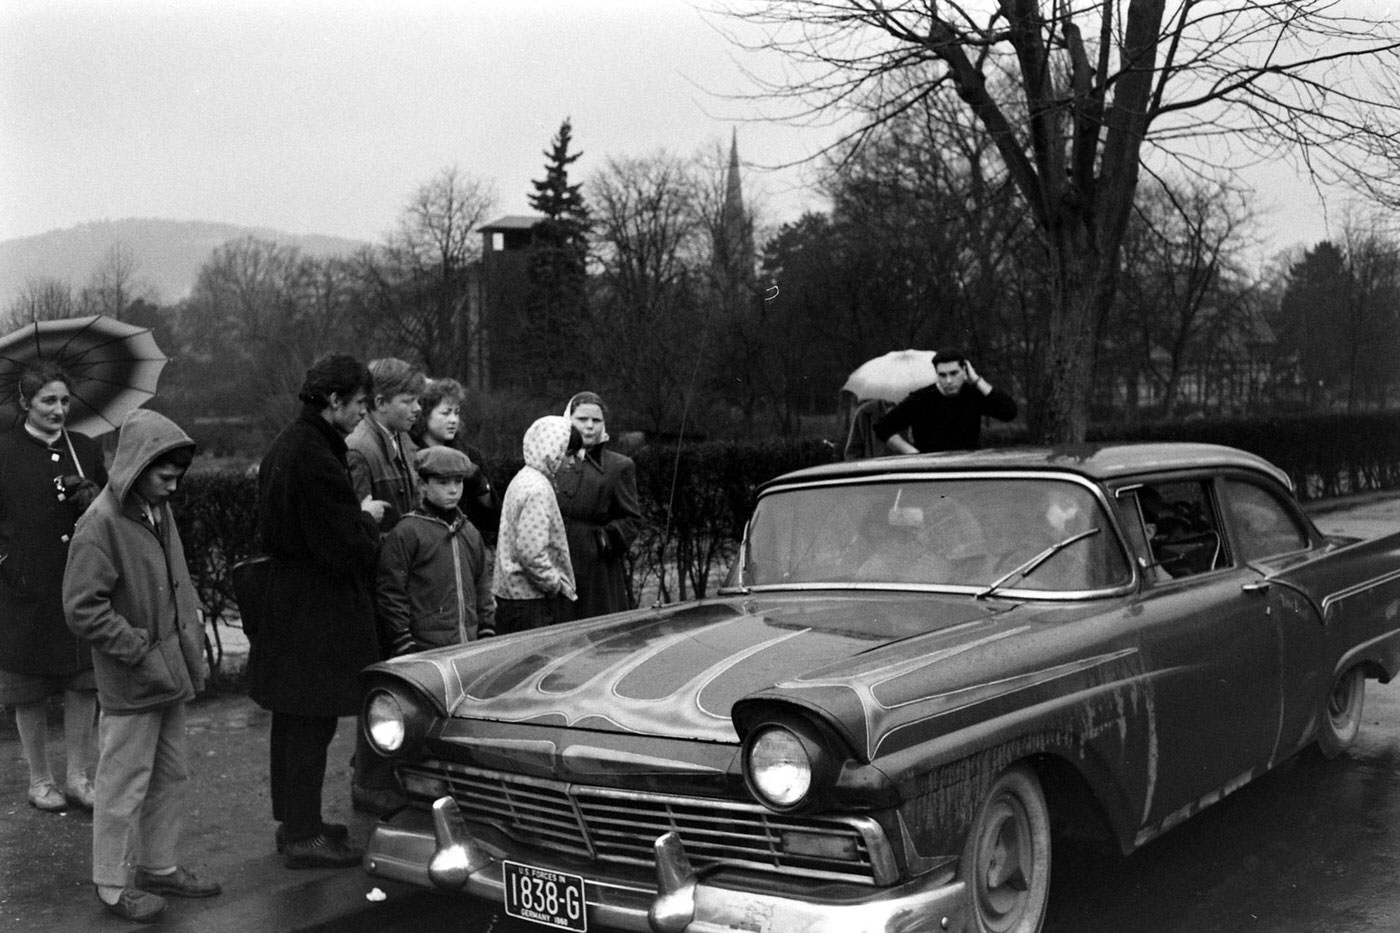 Elvis and Priscilla leave the house he and his family occupied in Bad Nauheim, Germany, March 1960.